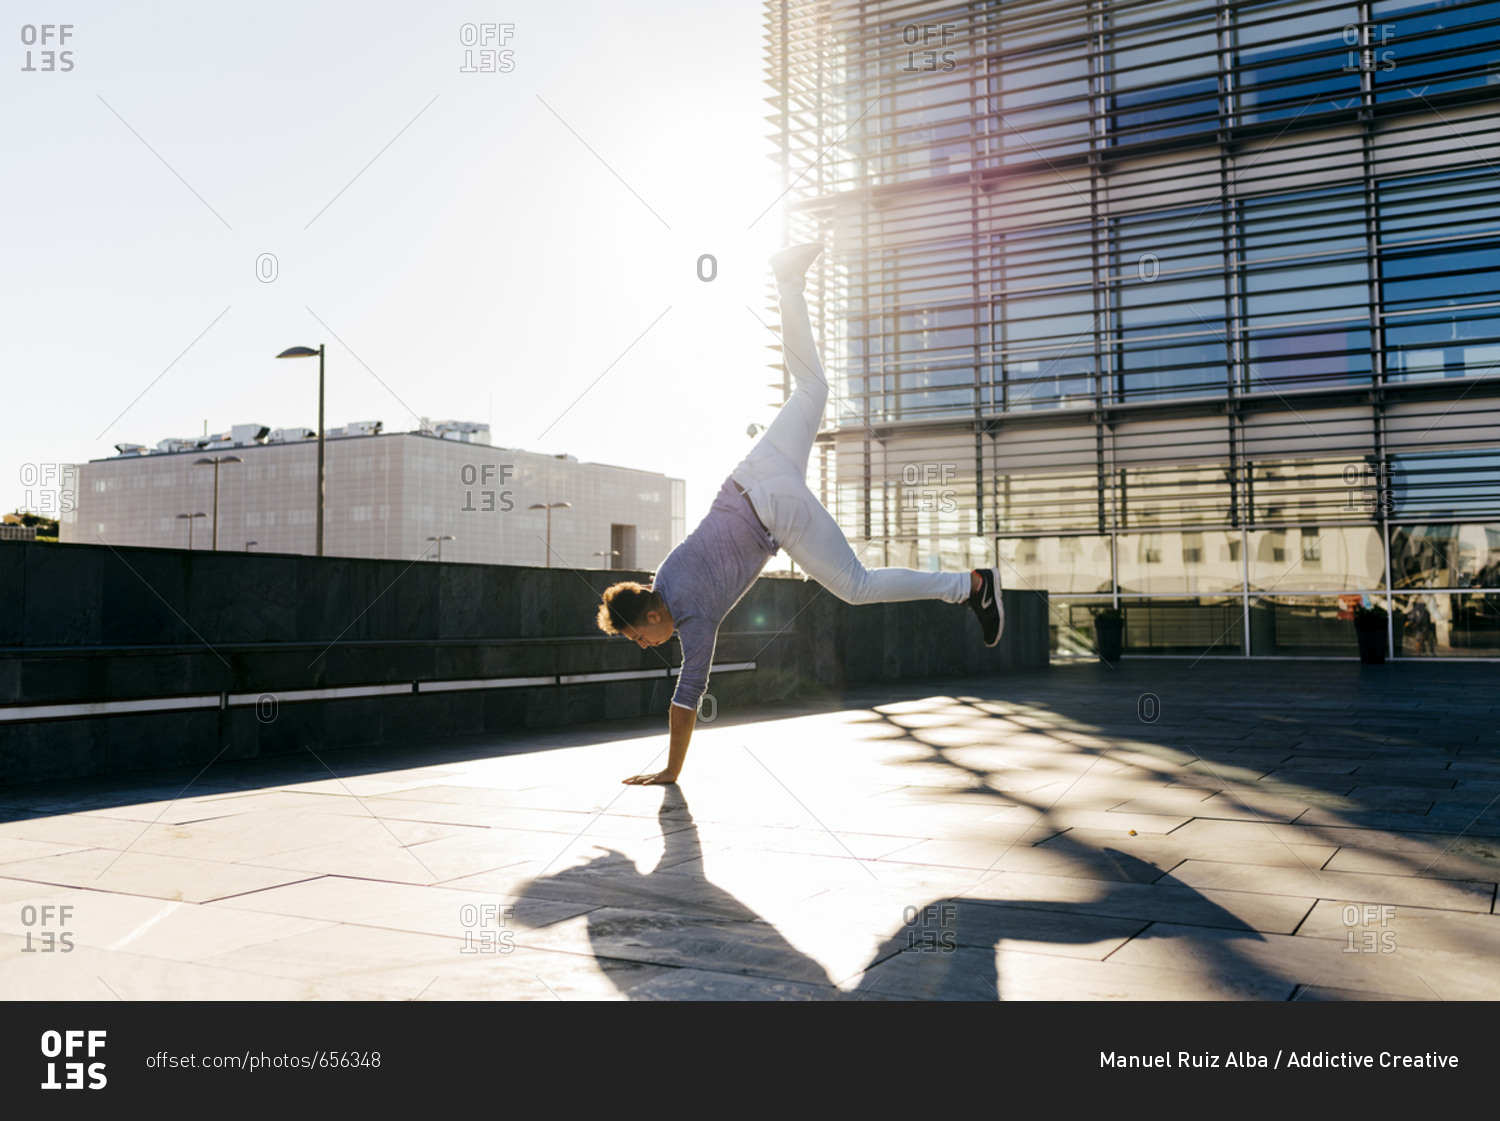 Side view of man standing on hand and performing trick in back lit on street